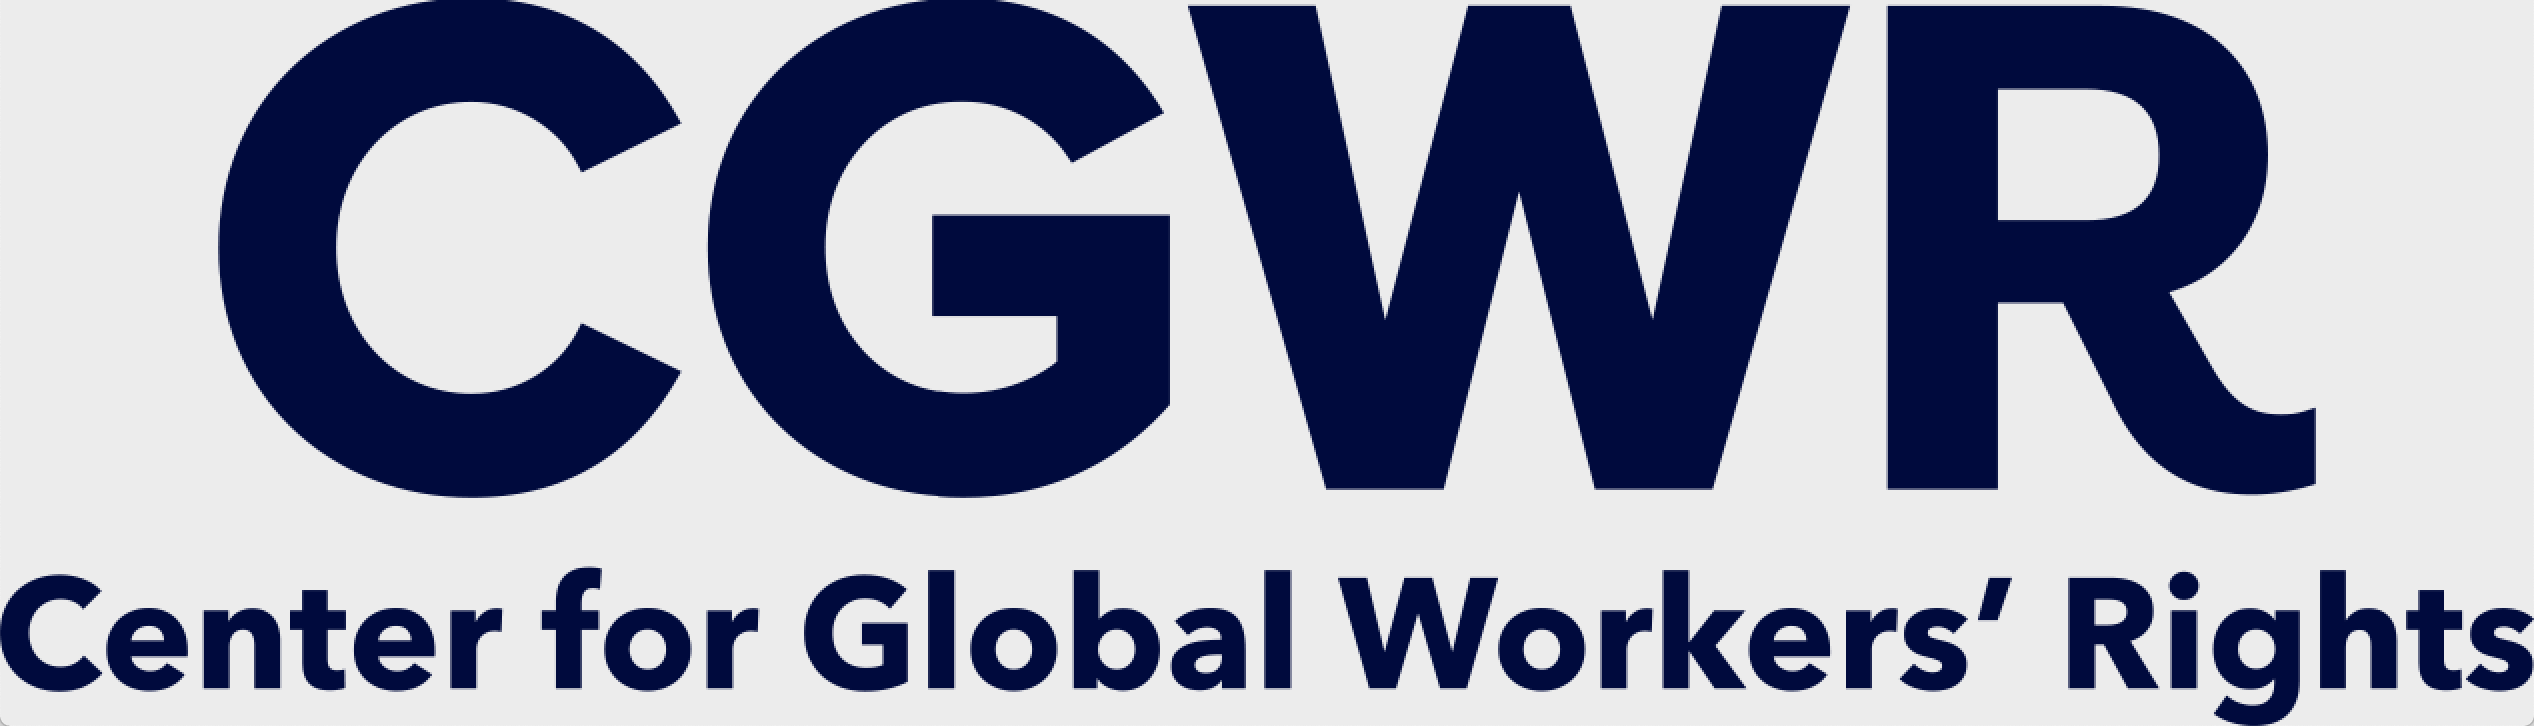 CGWR Releases New Research Report